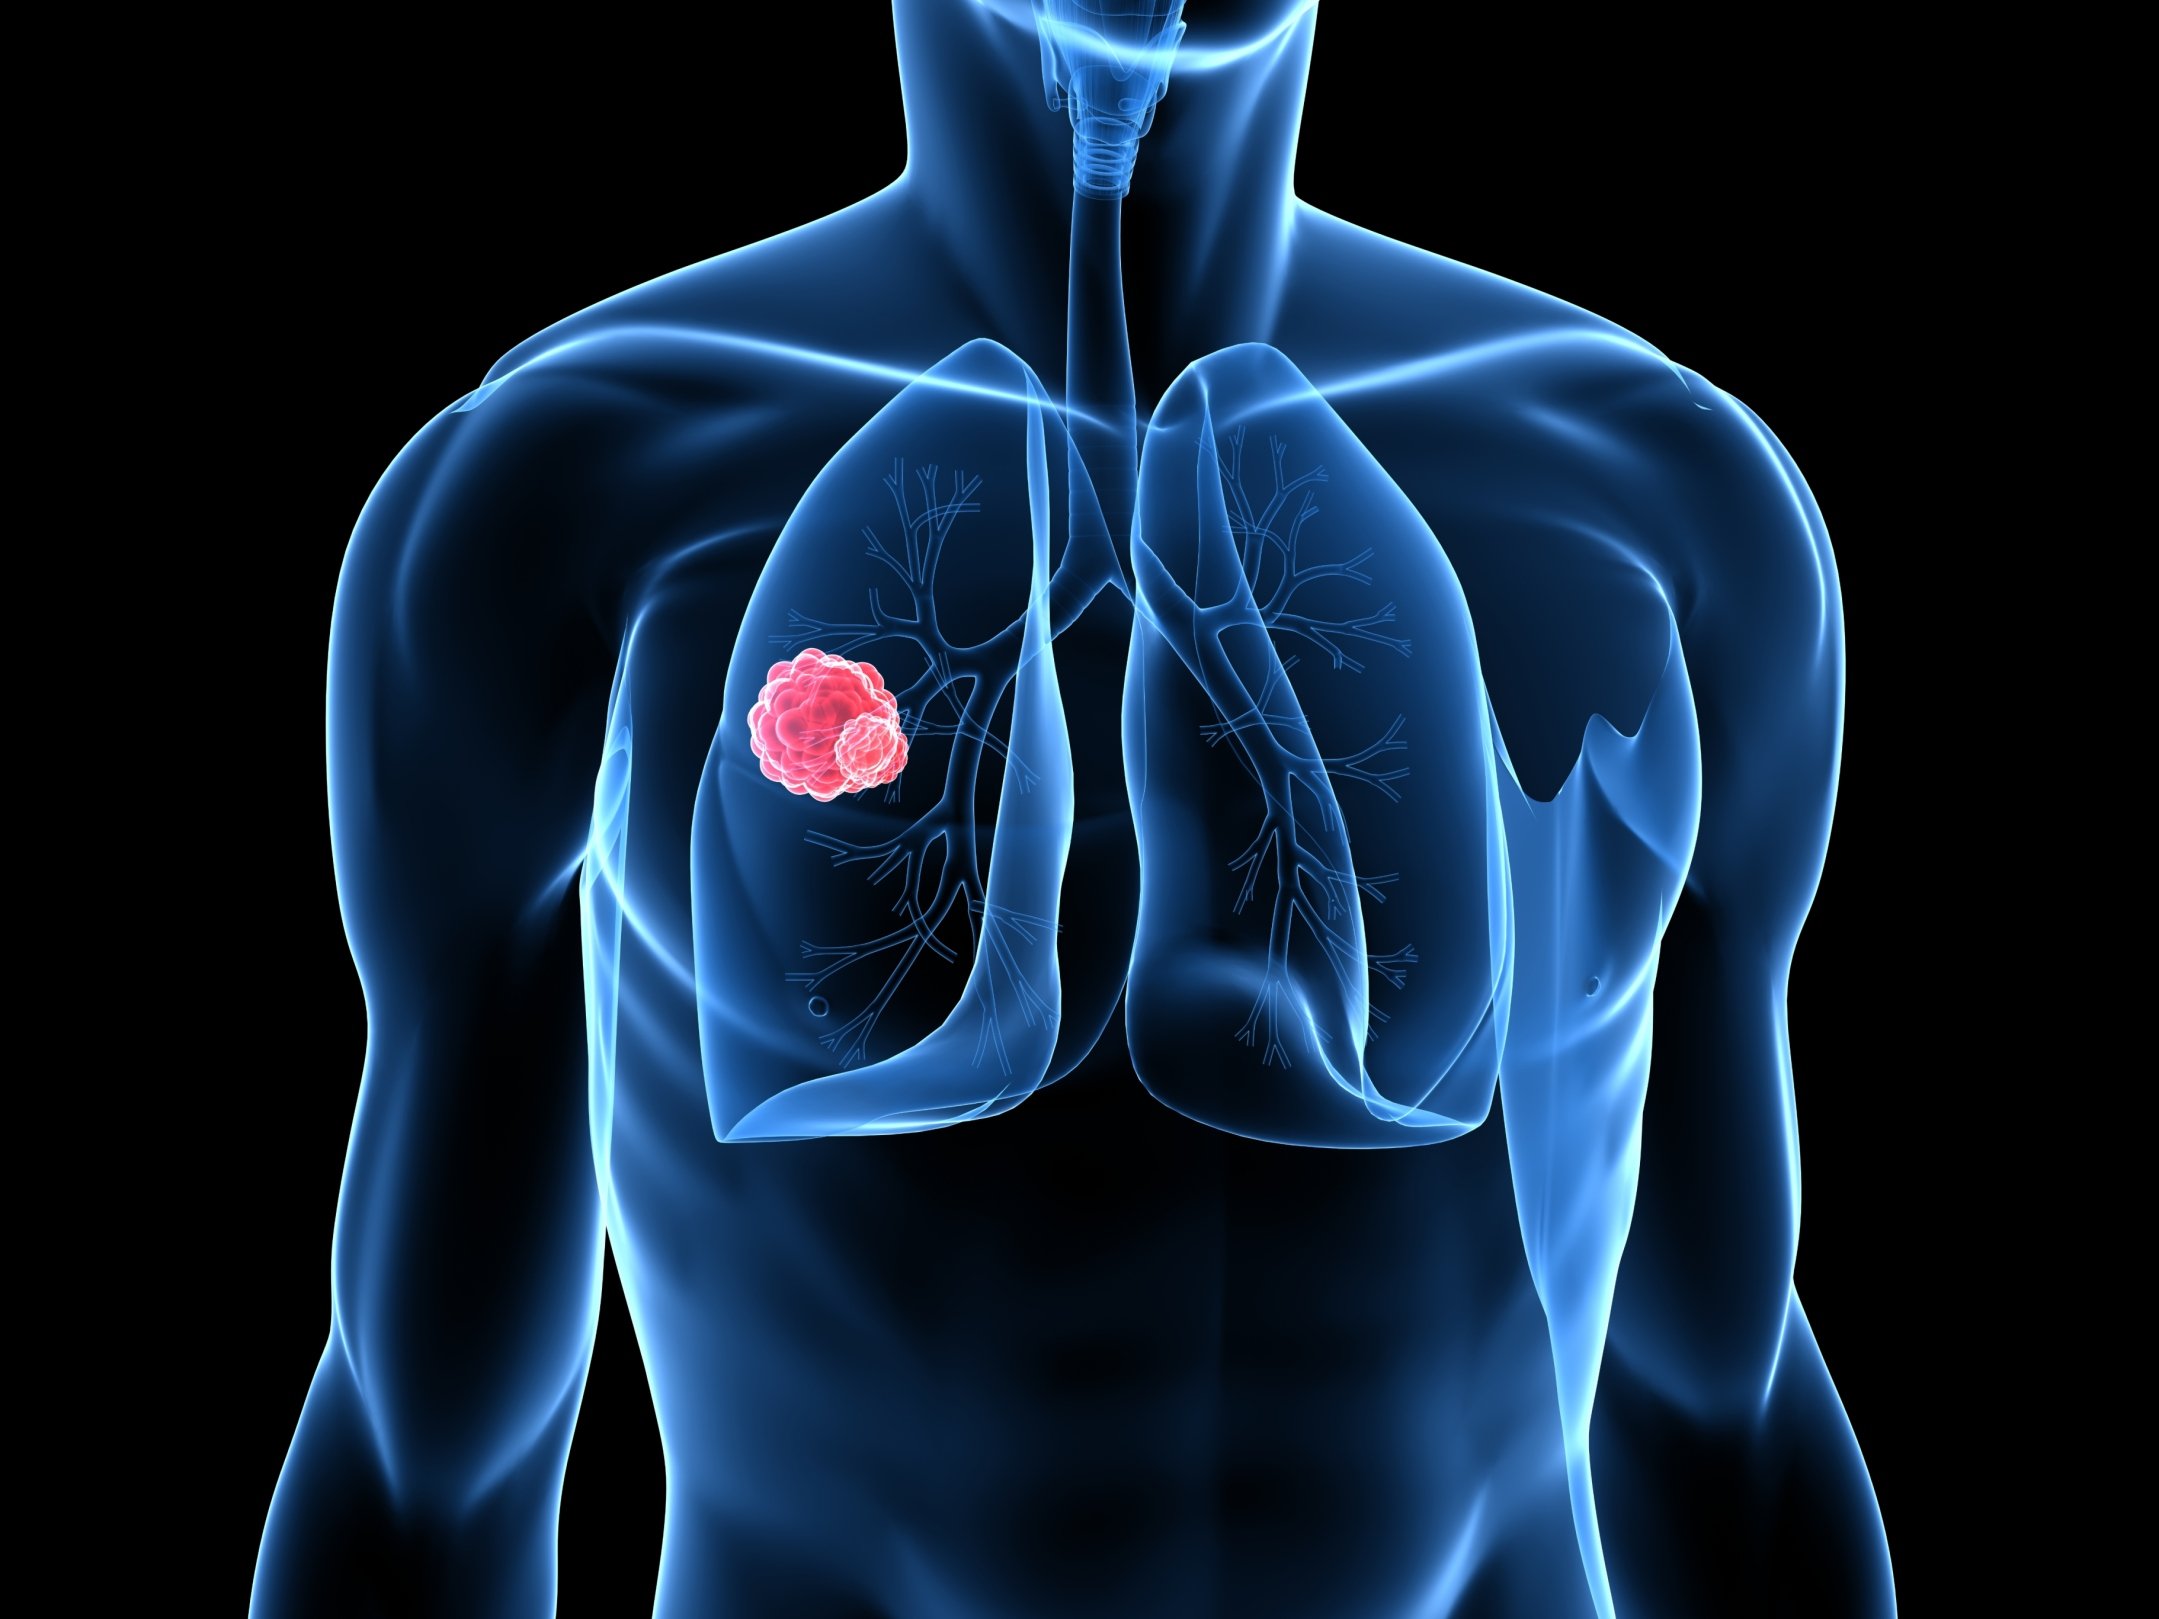 Medicare coverage of lung cancer screening explained